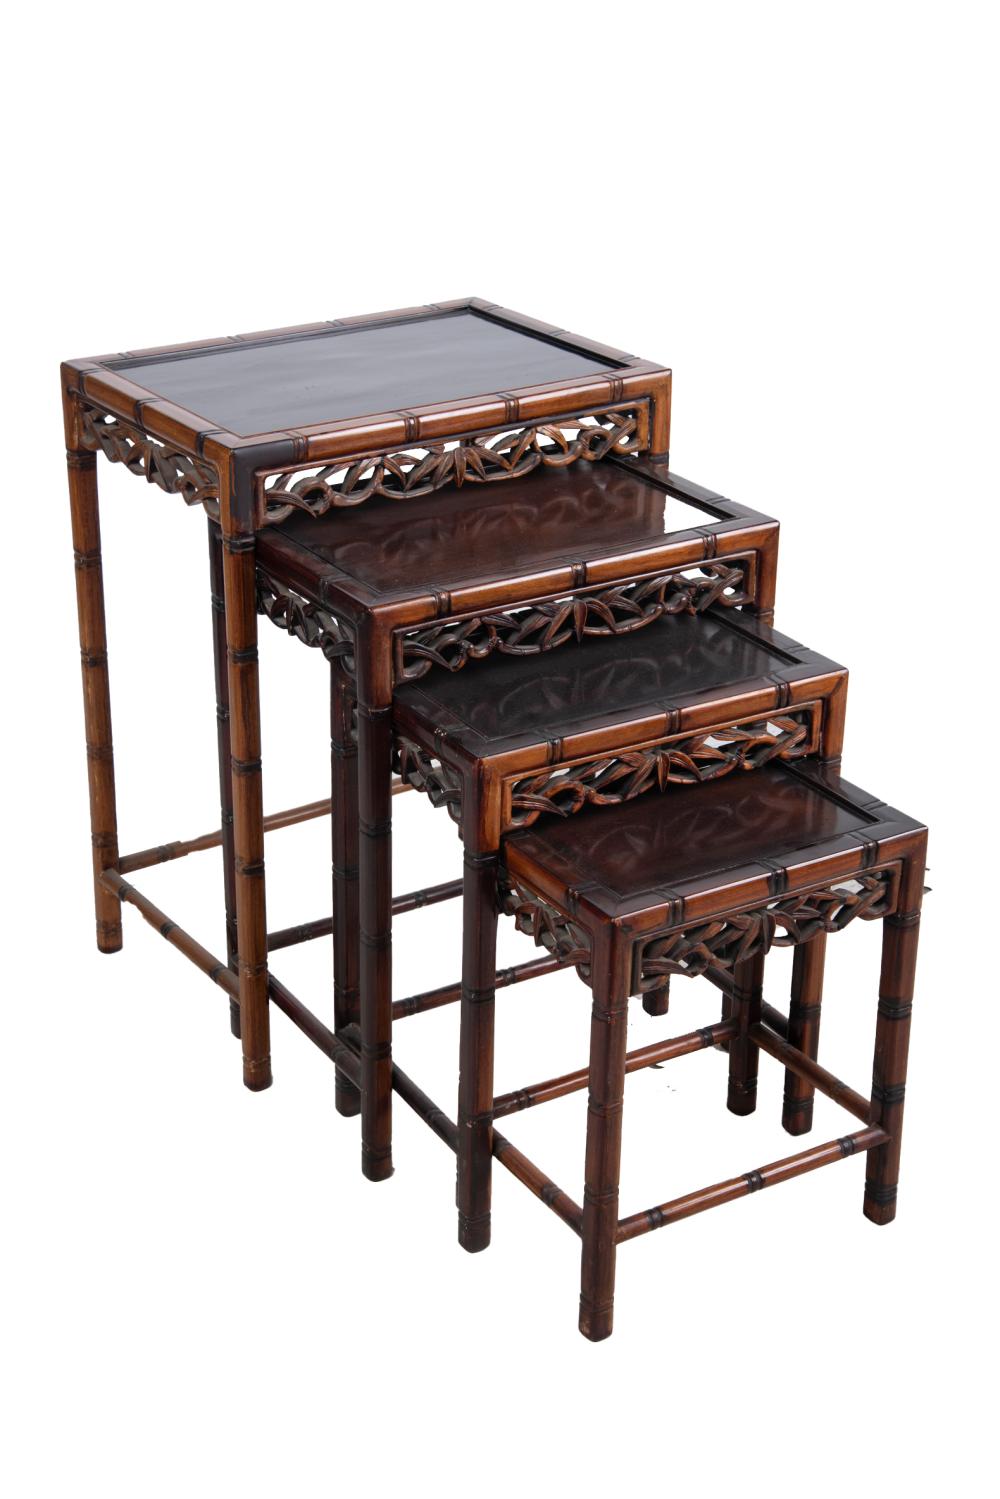 CHINESE NEST OF FOUR TABLESwith fretwork